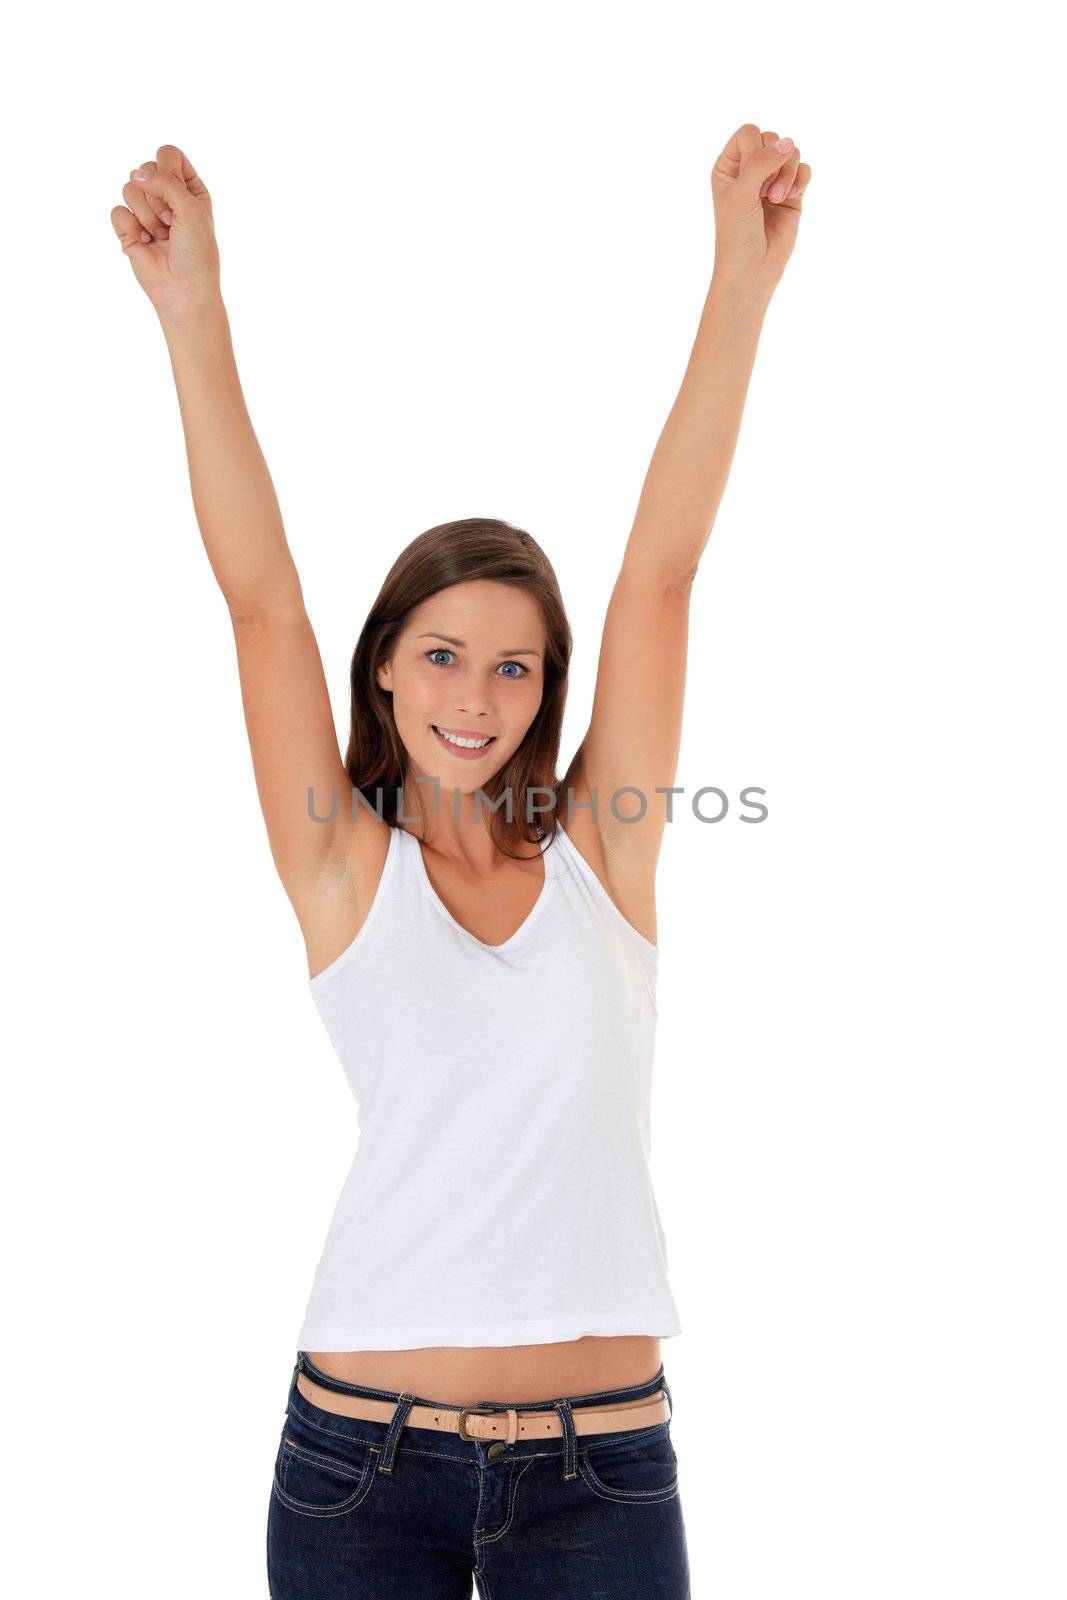 Cheering young woman. All on white background.